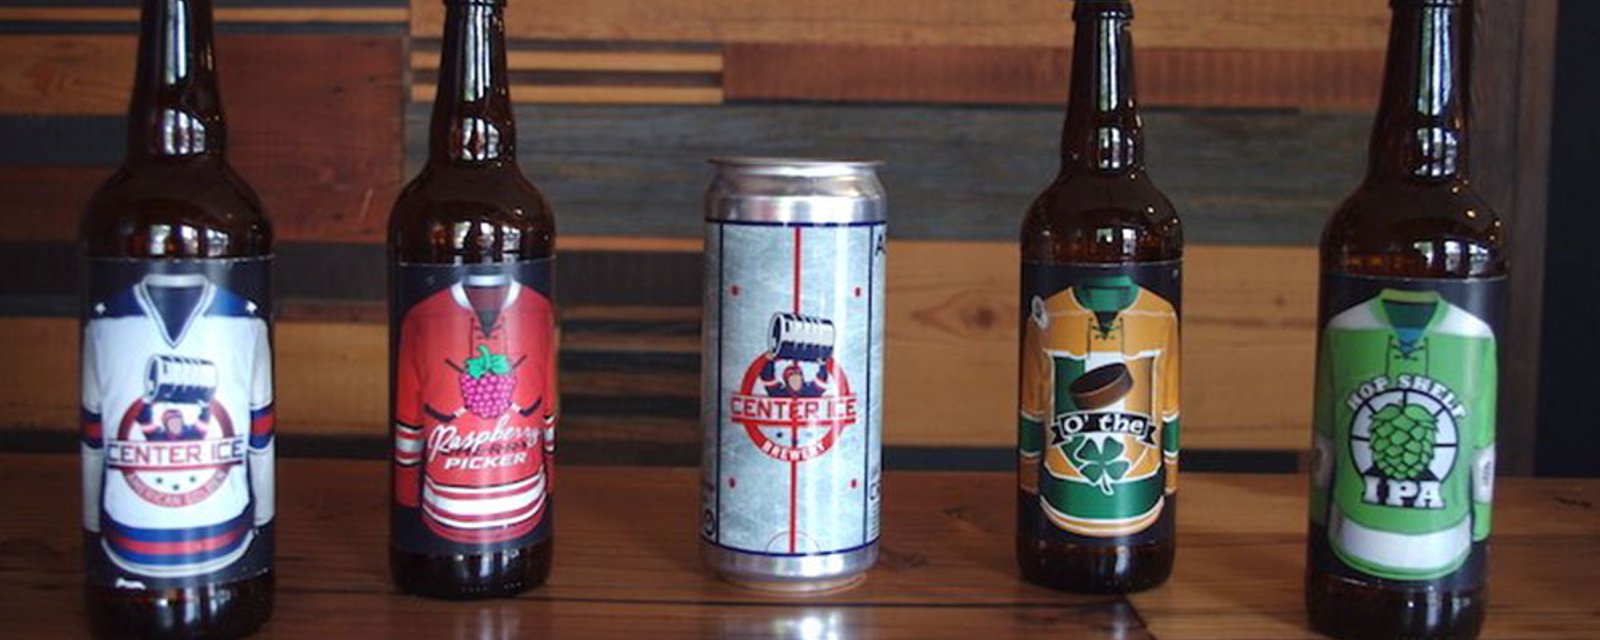 Incredible hockey themed craft brewery opens in St Louis